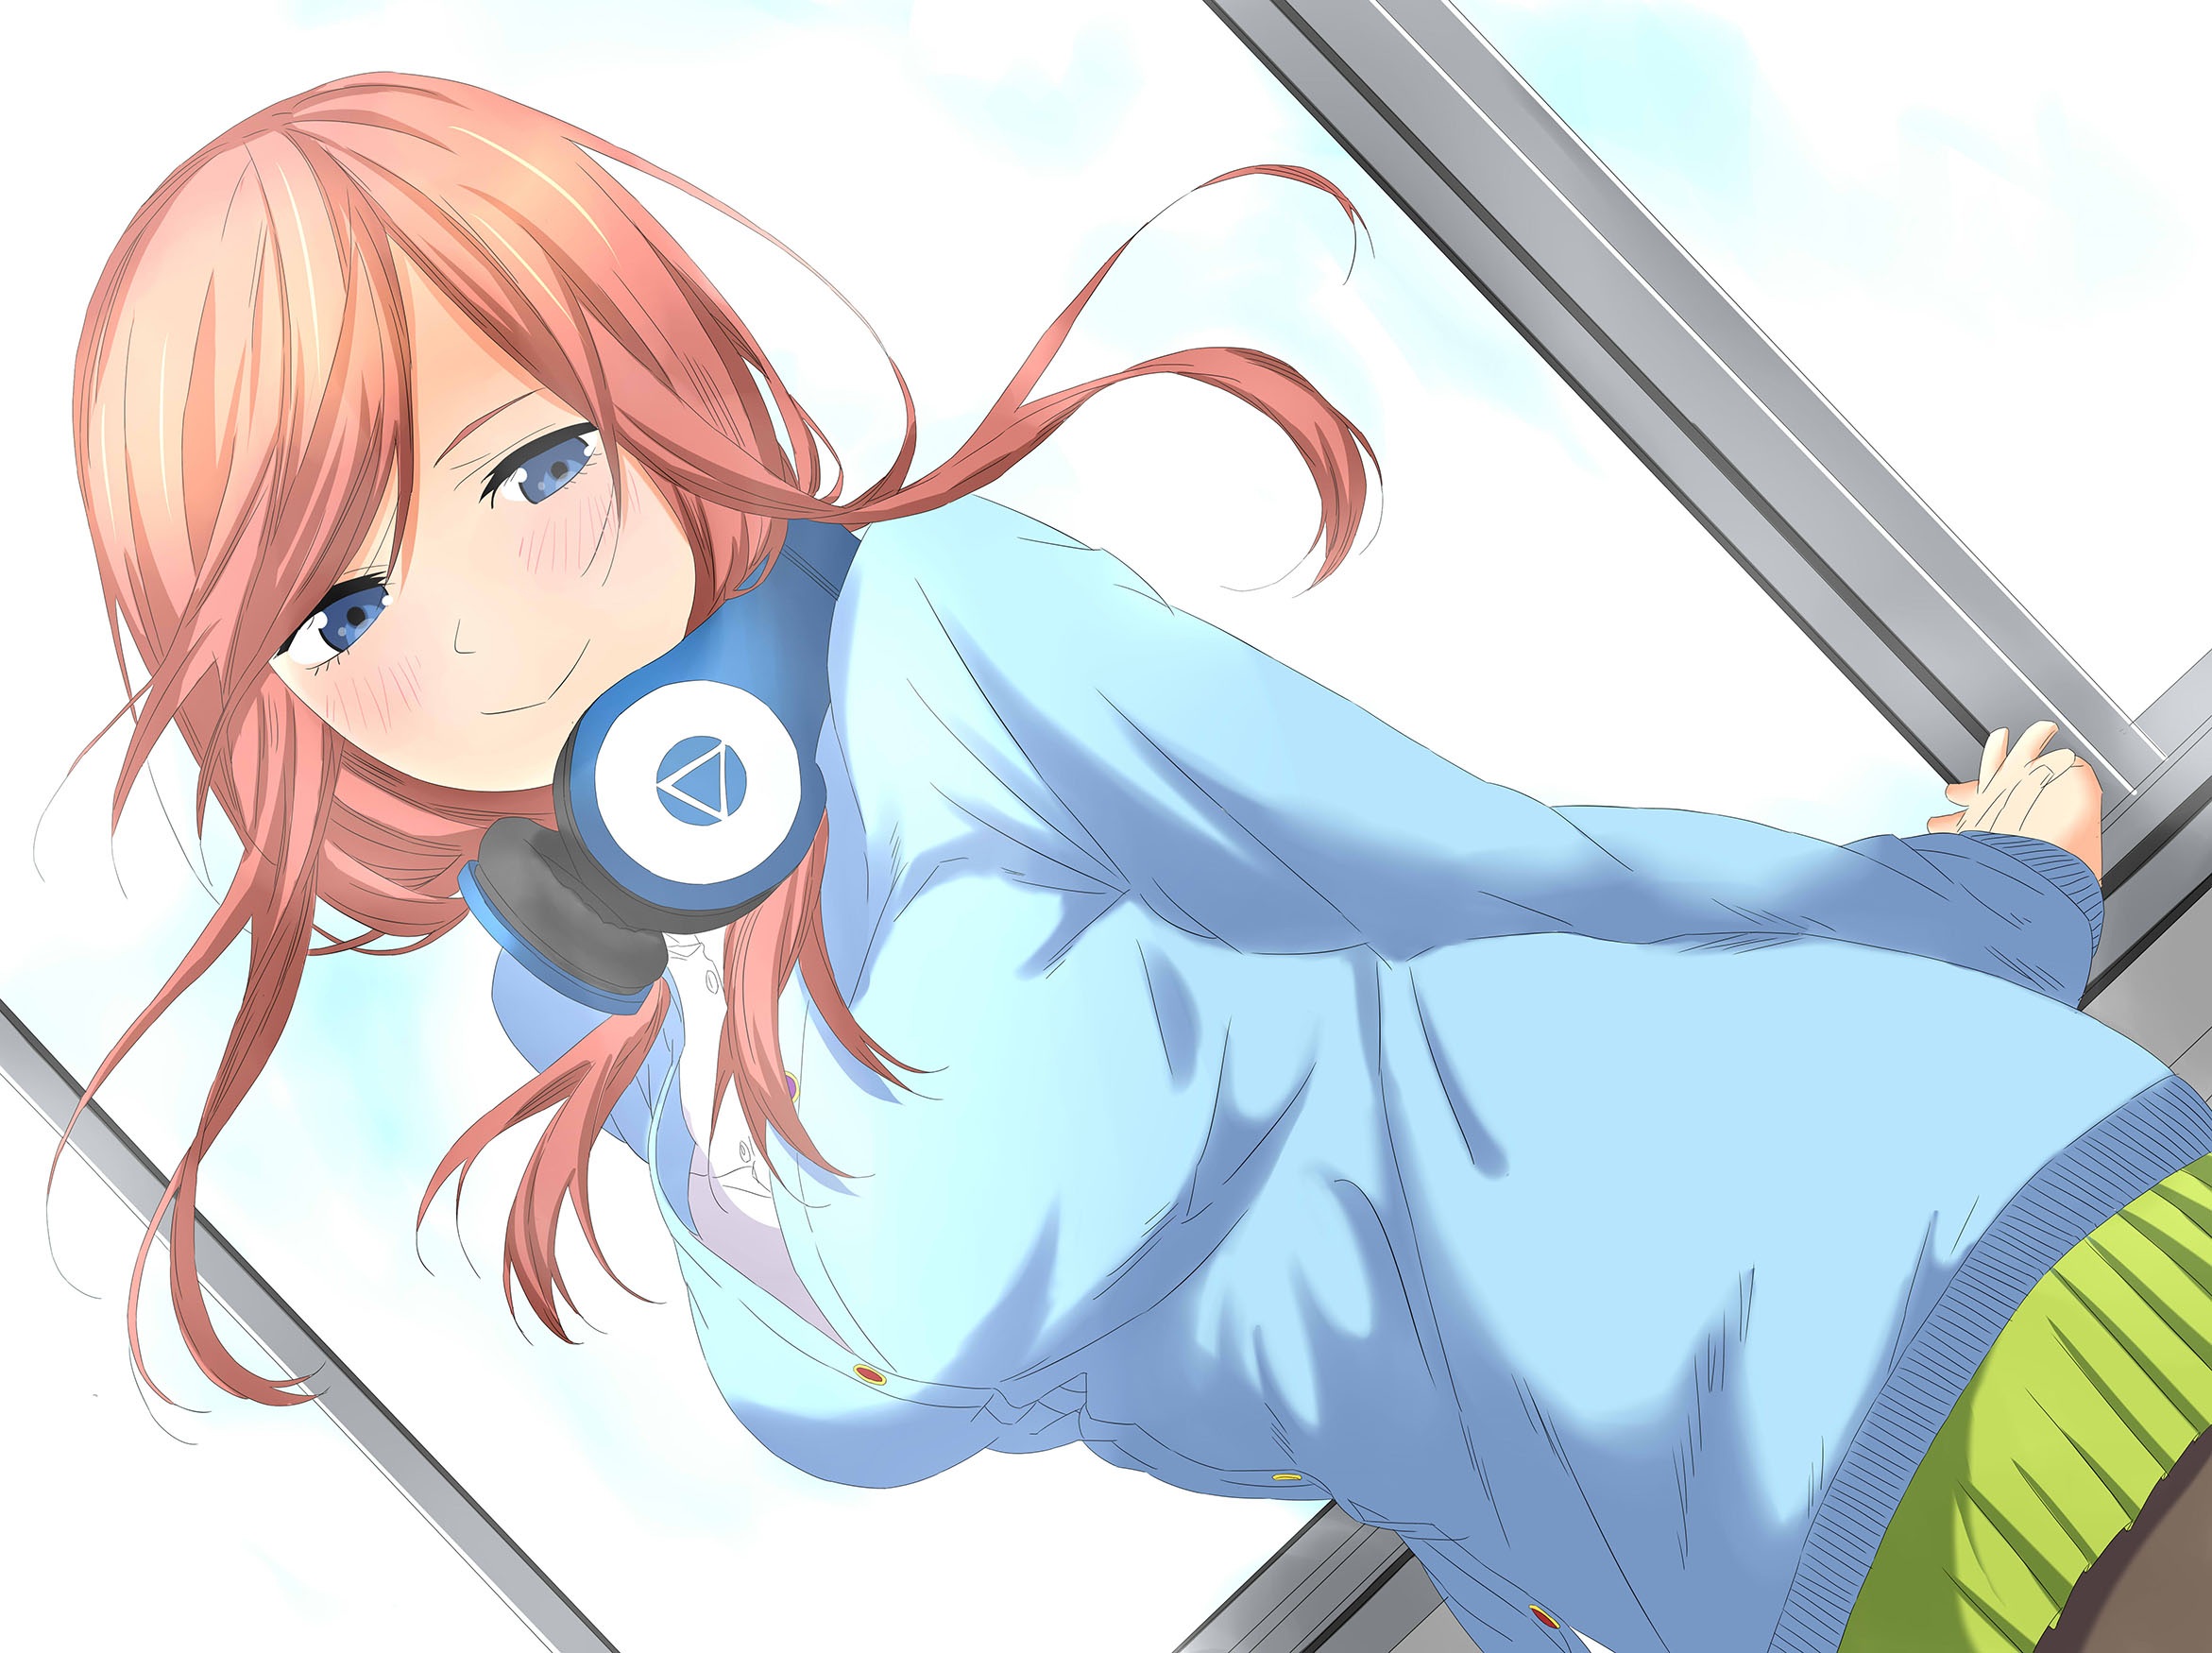 The Quintessential Quintuplets HD Wallpaper by 熬夜了没睡醒